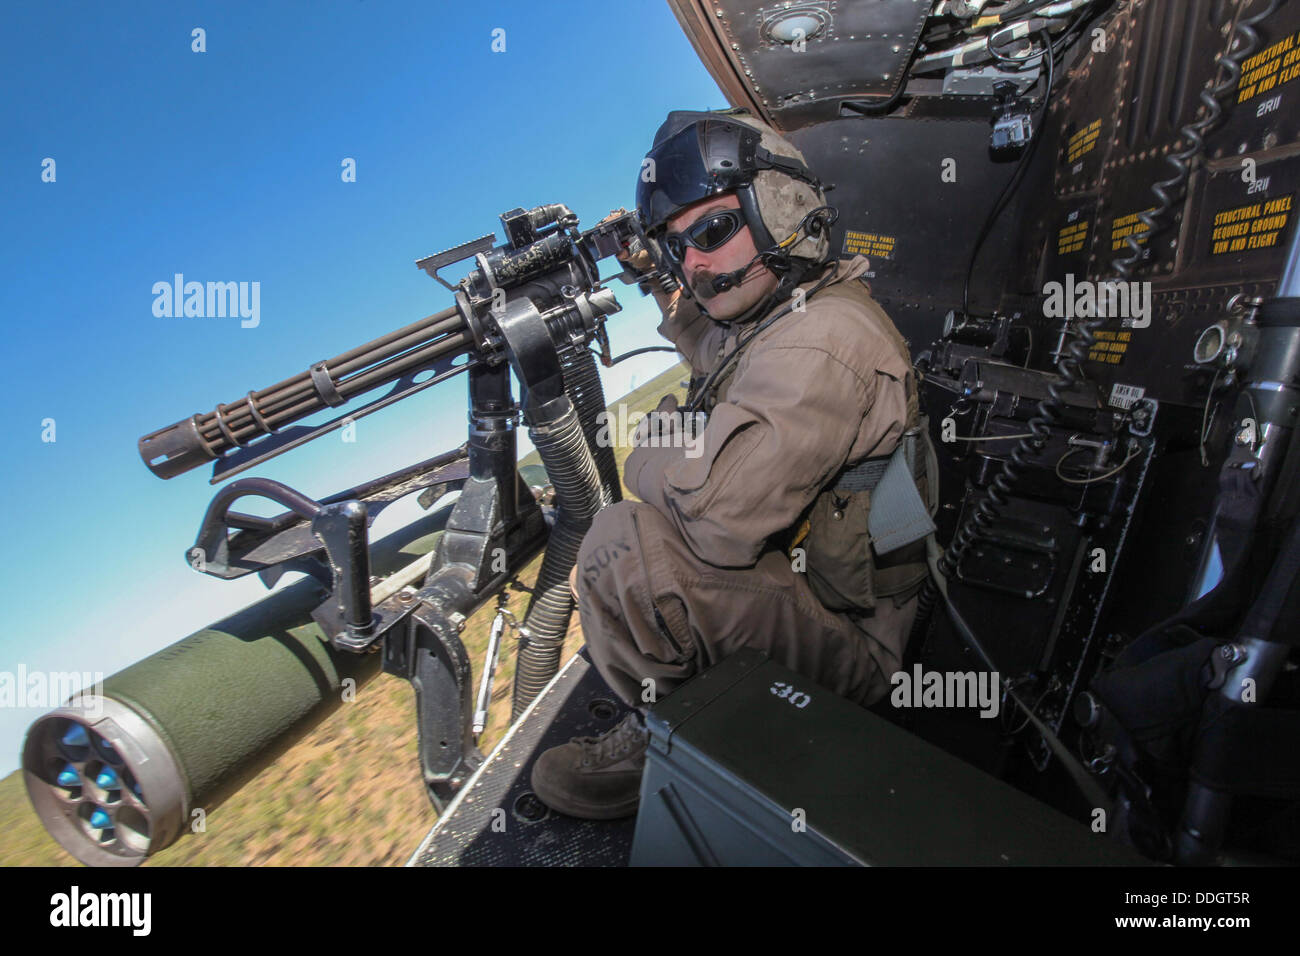 A US Marine door gunner searches for targets aboard a UH-1Y Venom helicopter during live-fire training as part of Exercise Koolendong September 2, 2013 in the Northern Territory, Australia. Stock Photo